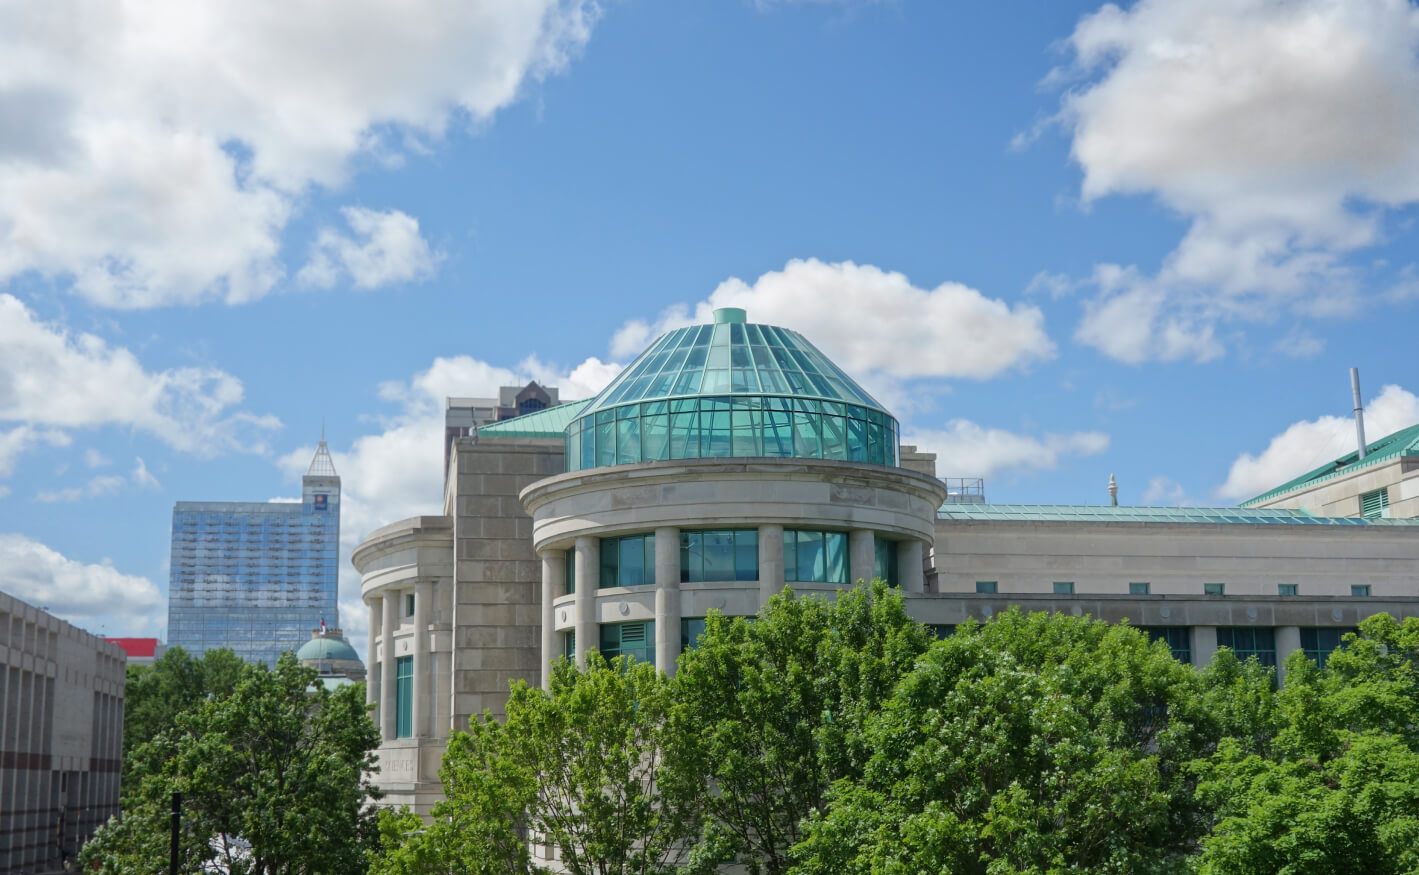 North Carolina Museum of Natural Science in Raleigh